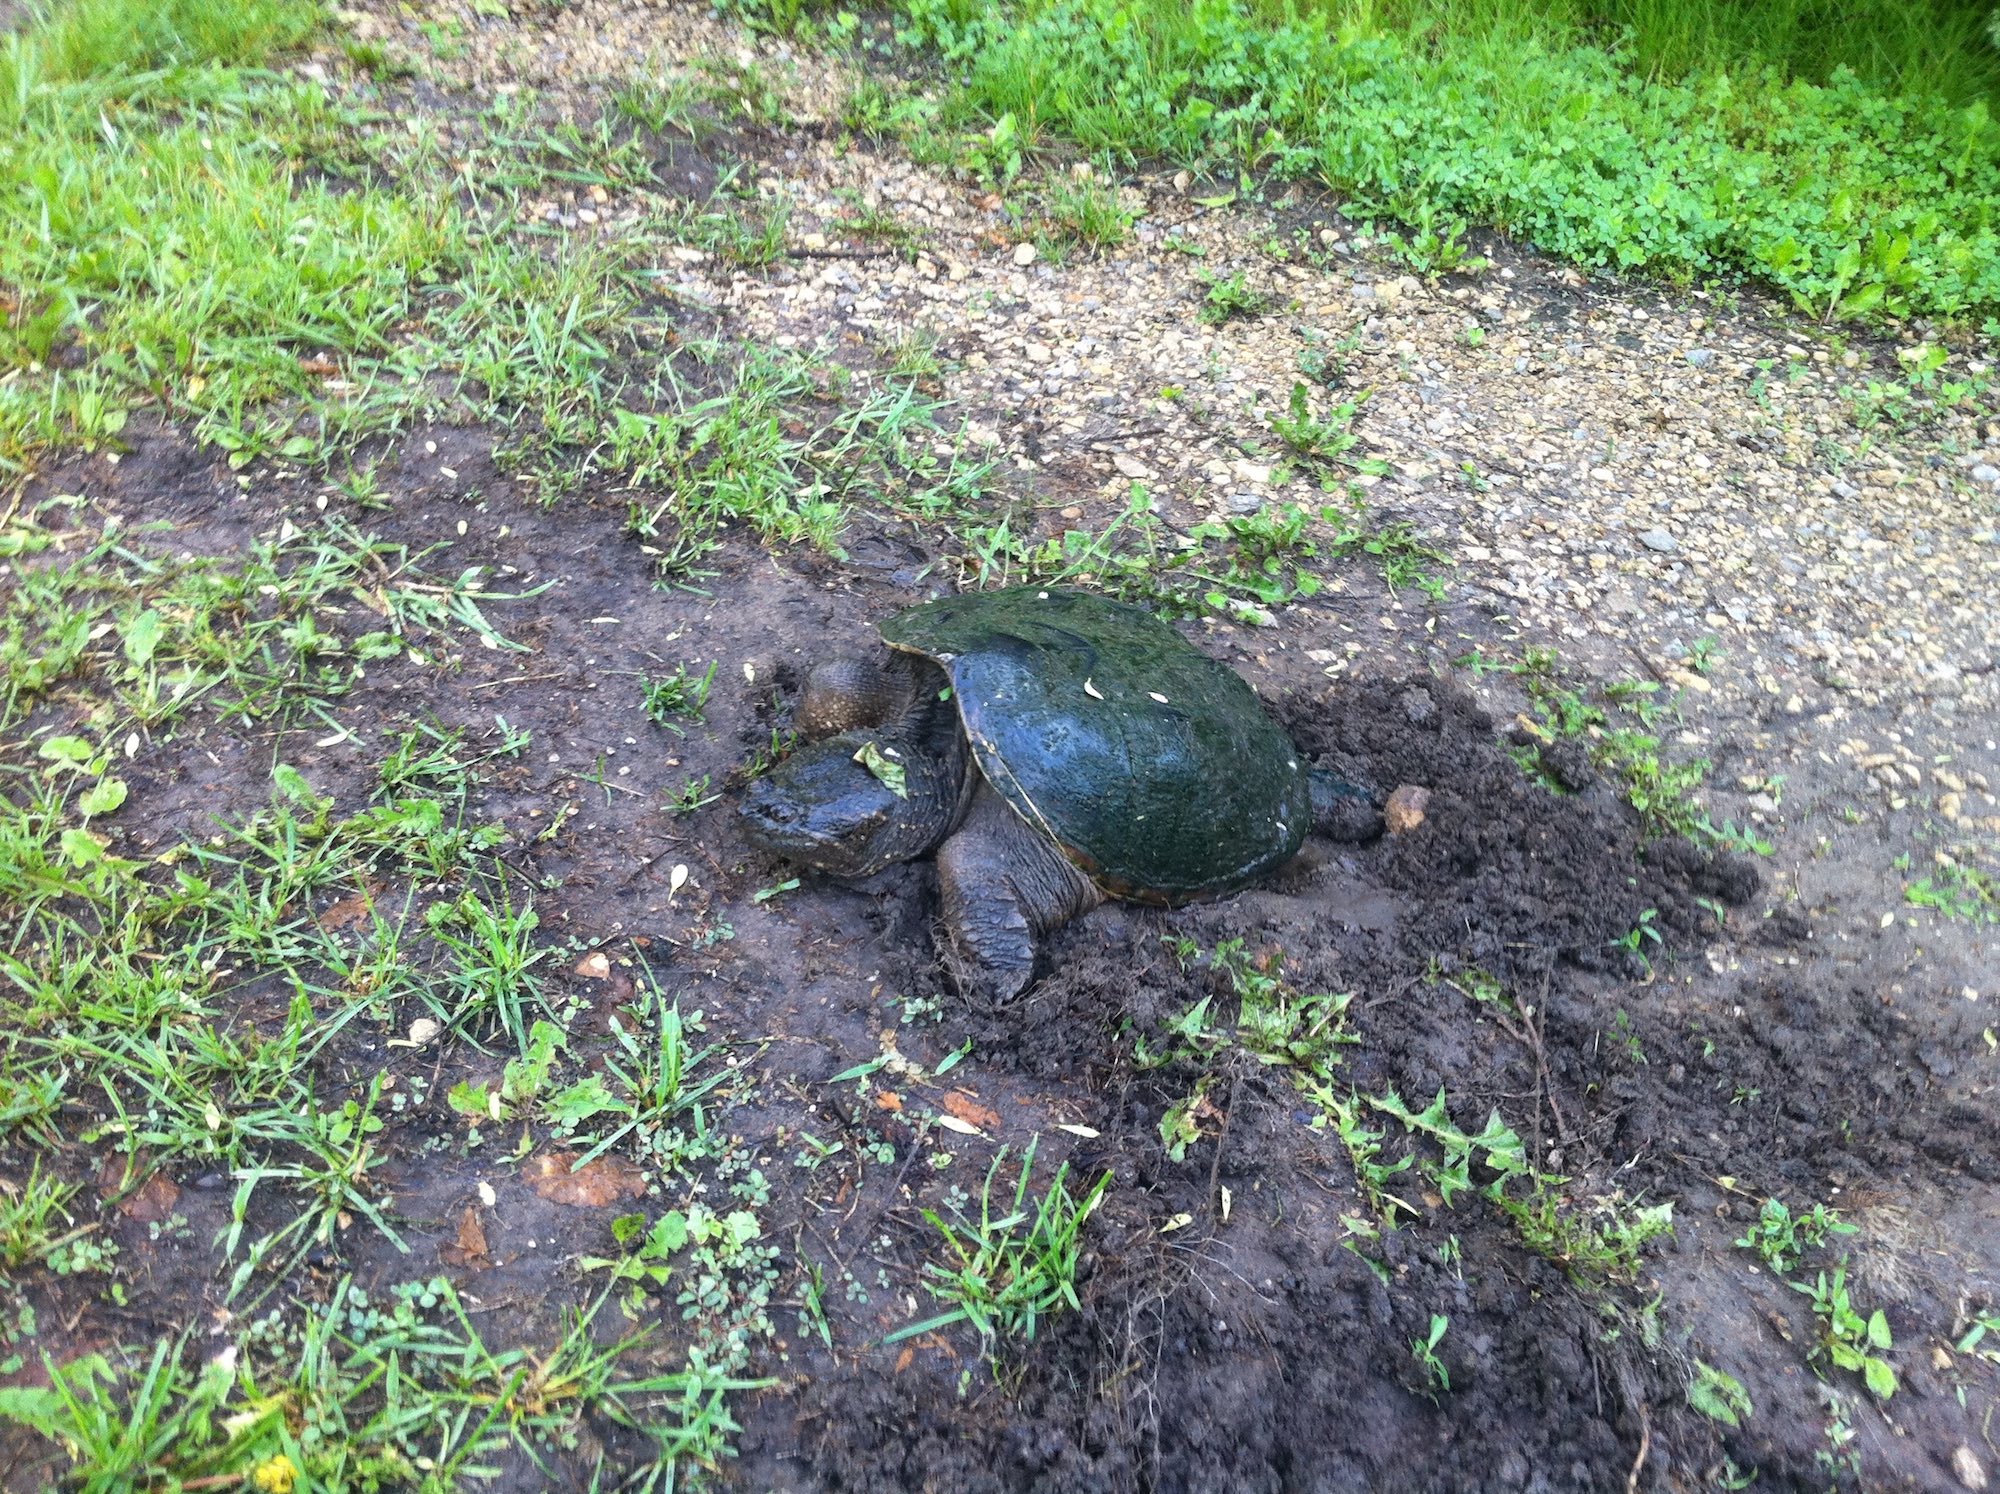 Snapping Turtle laying eggs on bike path in Oak Savanna near Ho-Nee-Um Pond on Lake Wingra in Madison, Wisconsin on June 10, 2013.